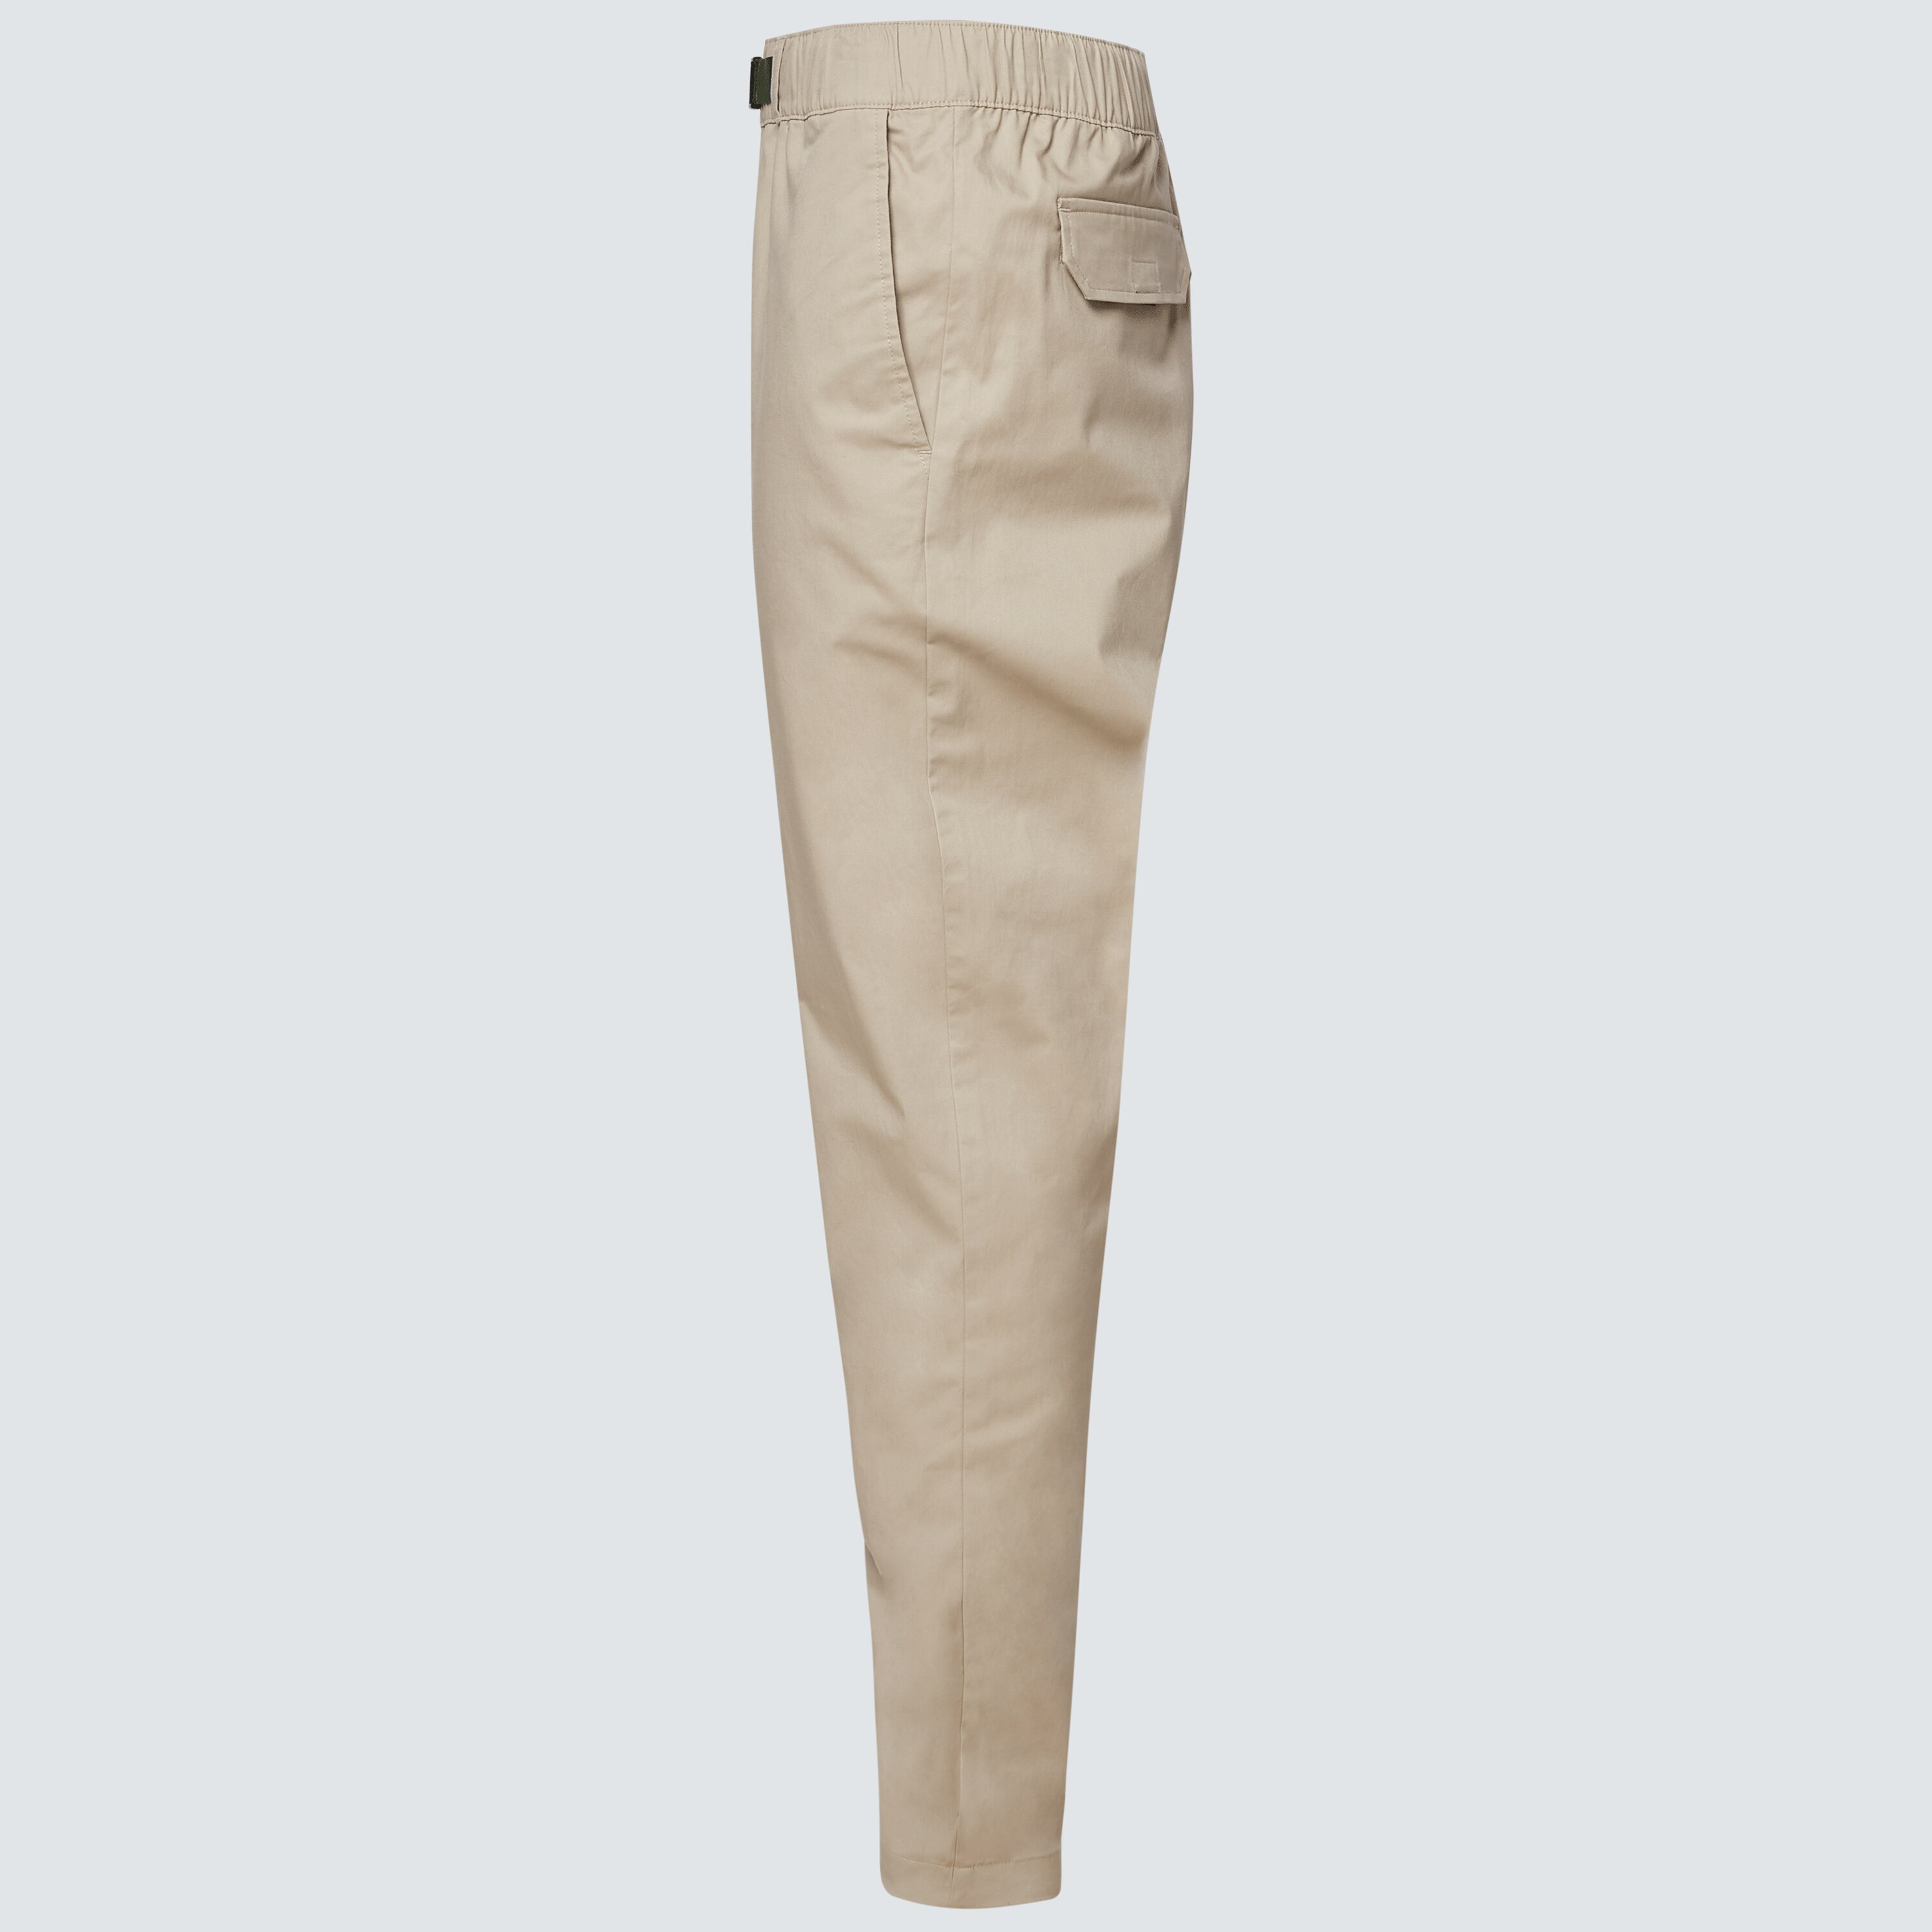 Liu Jo Cotton Pants in Khaki Slacks and Chinos Skinny trousers Womens Clothing Trousers Natural 